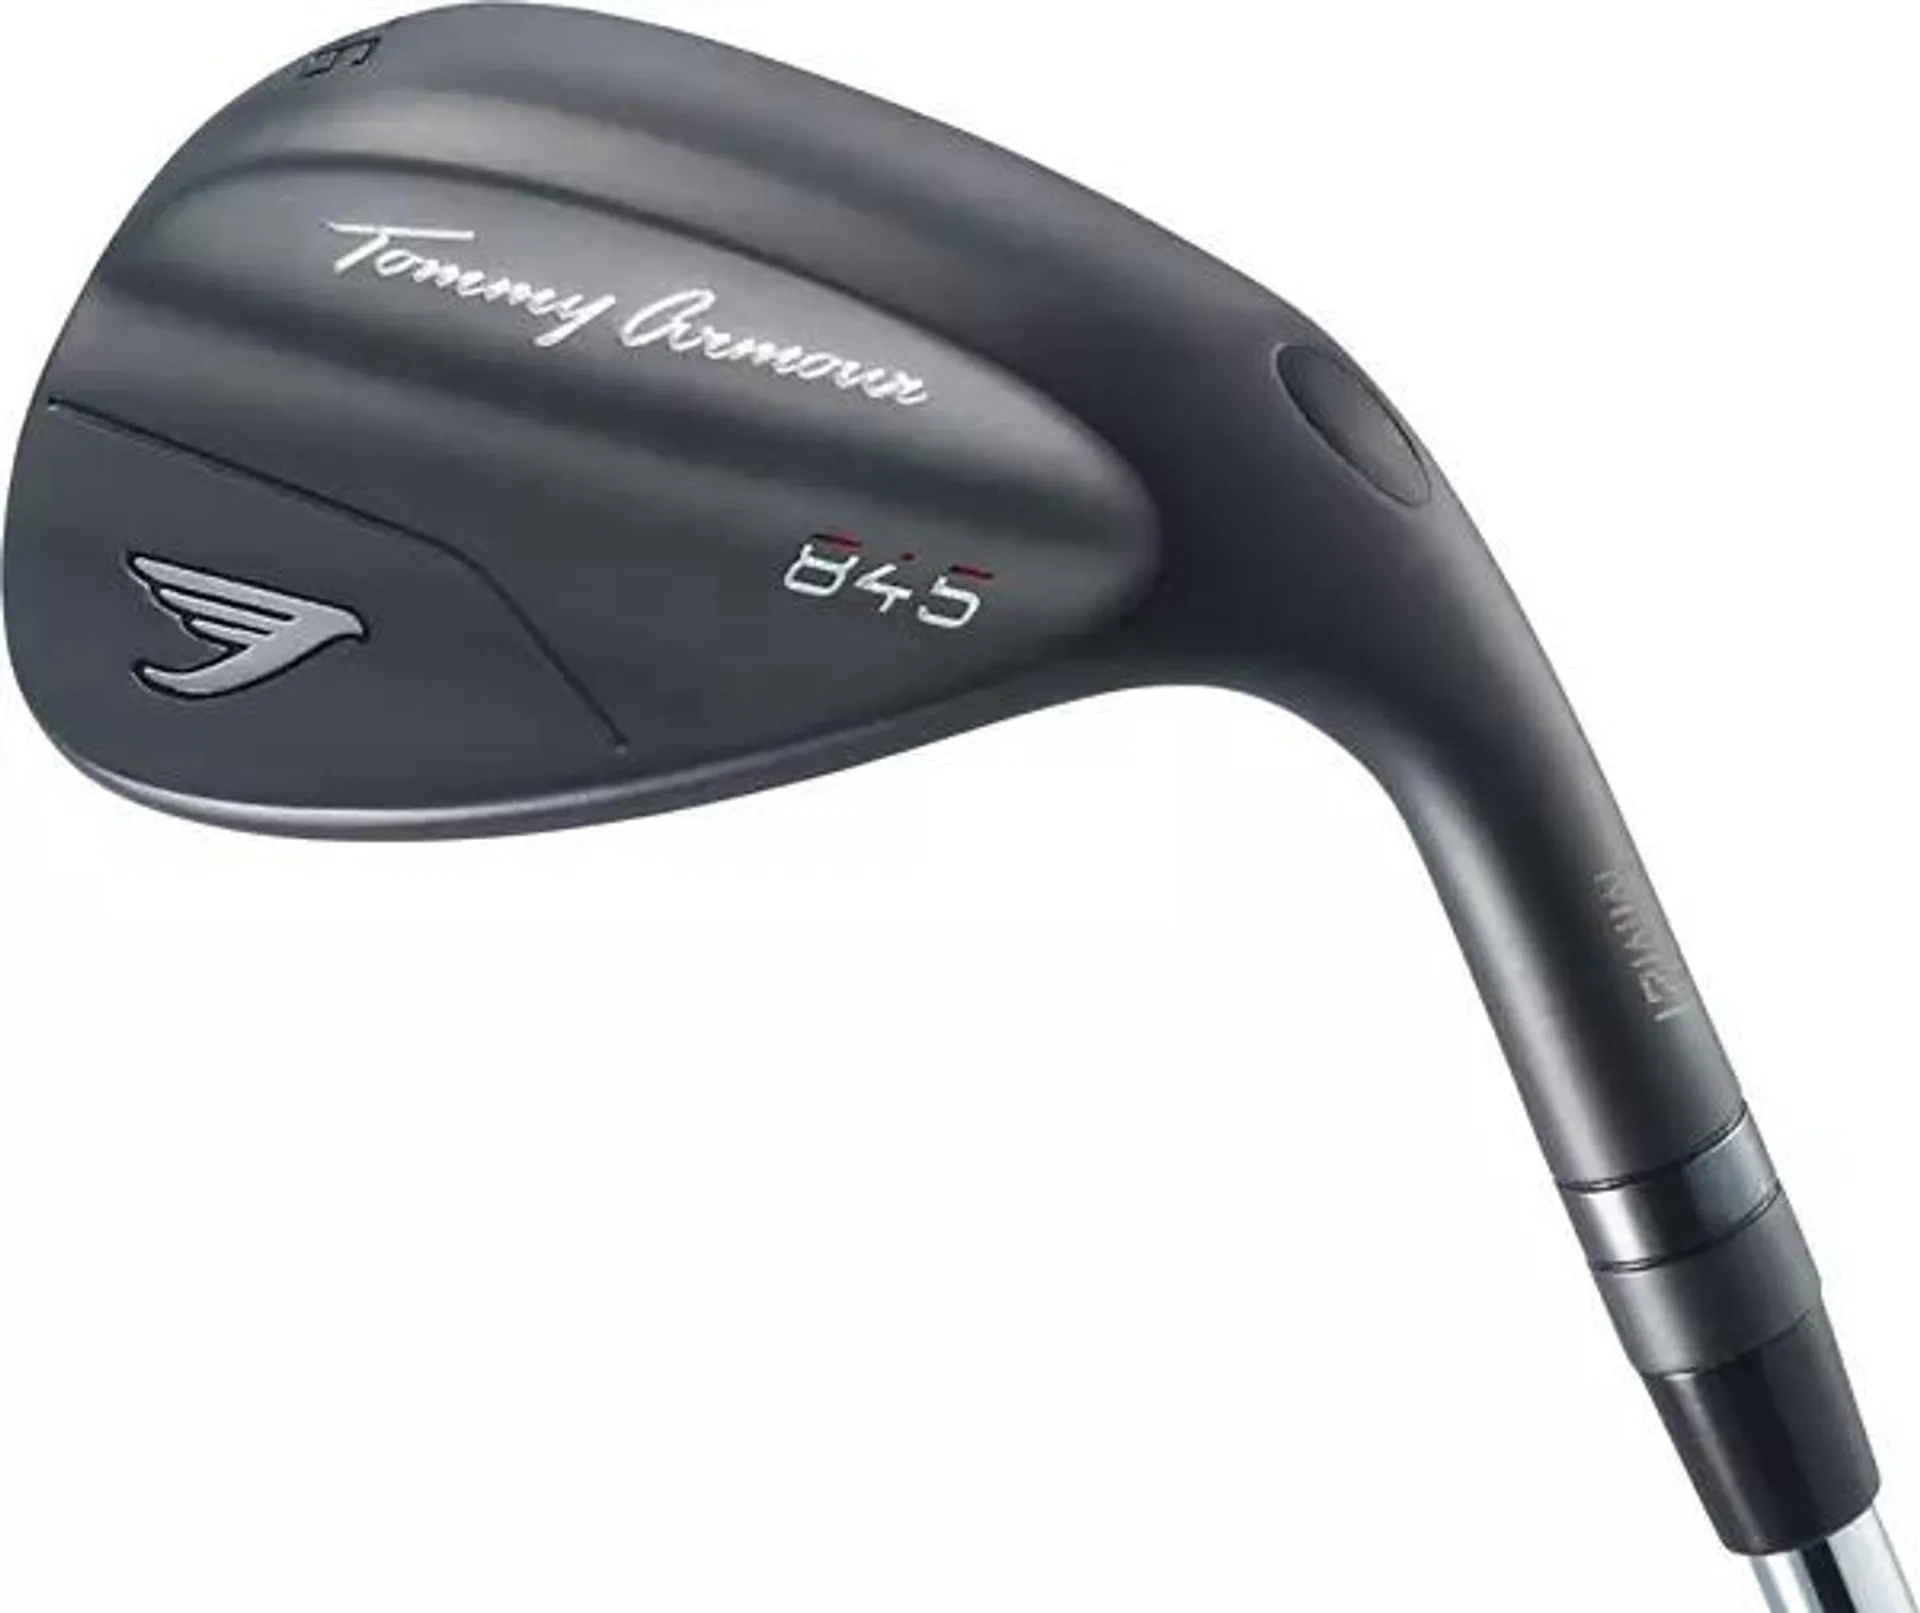 Tommy Armour 845 Wedge